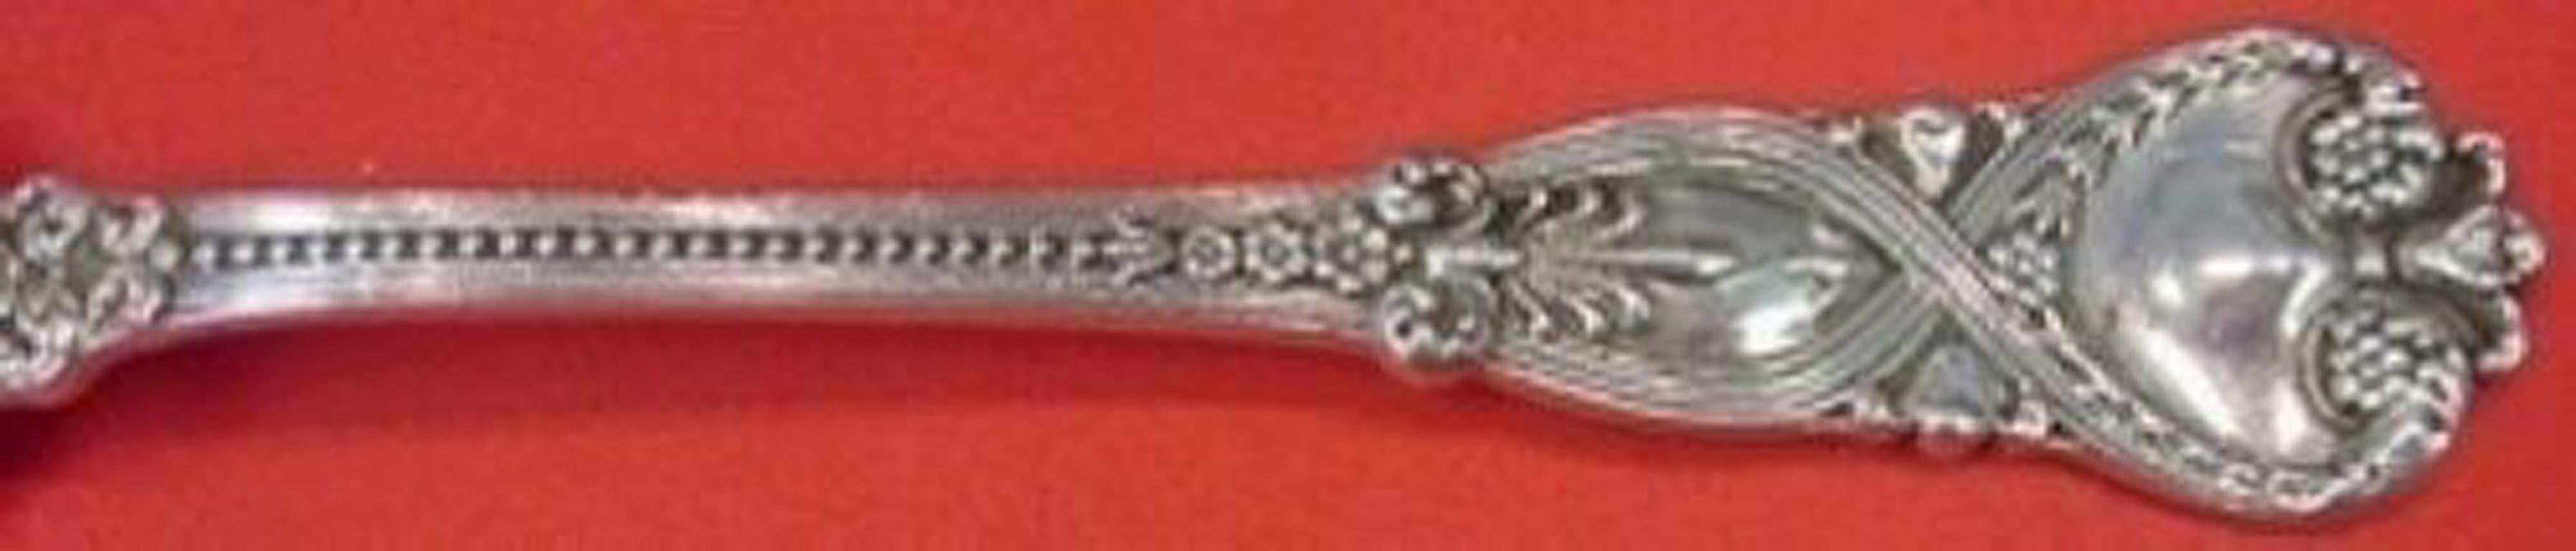 Sterling silver berry spoon conch 9 1/2